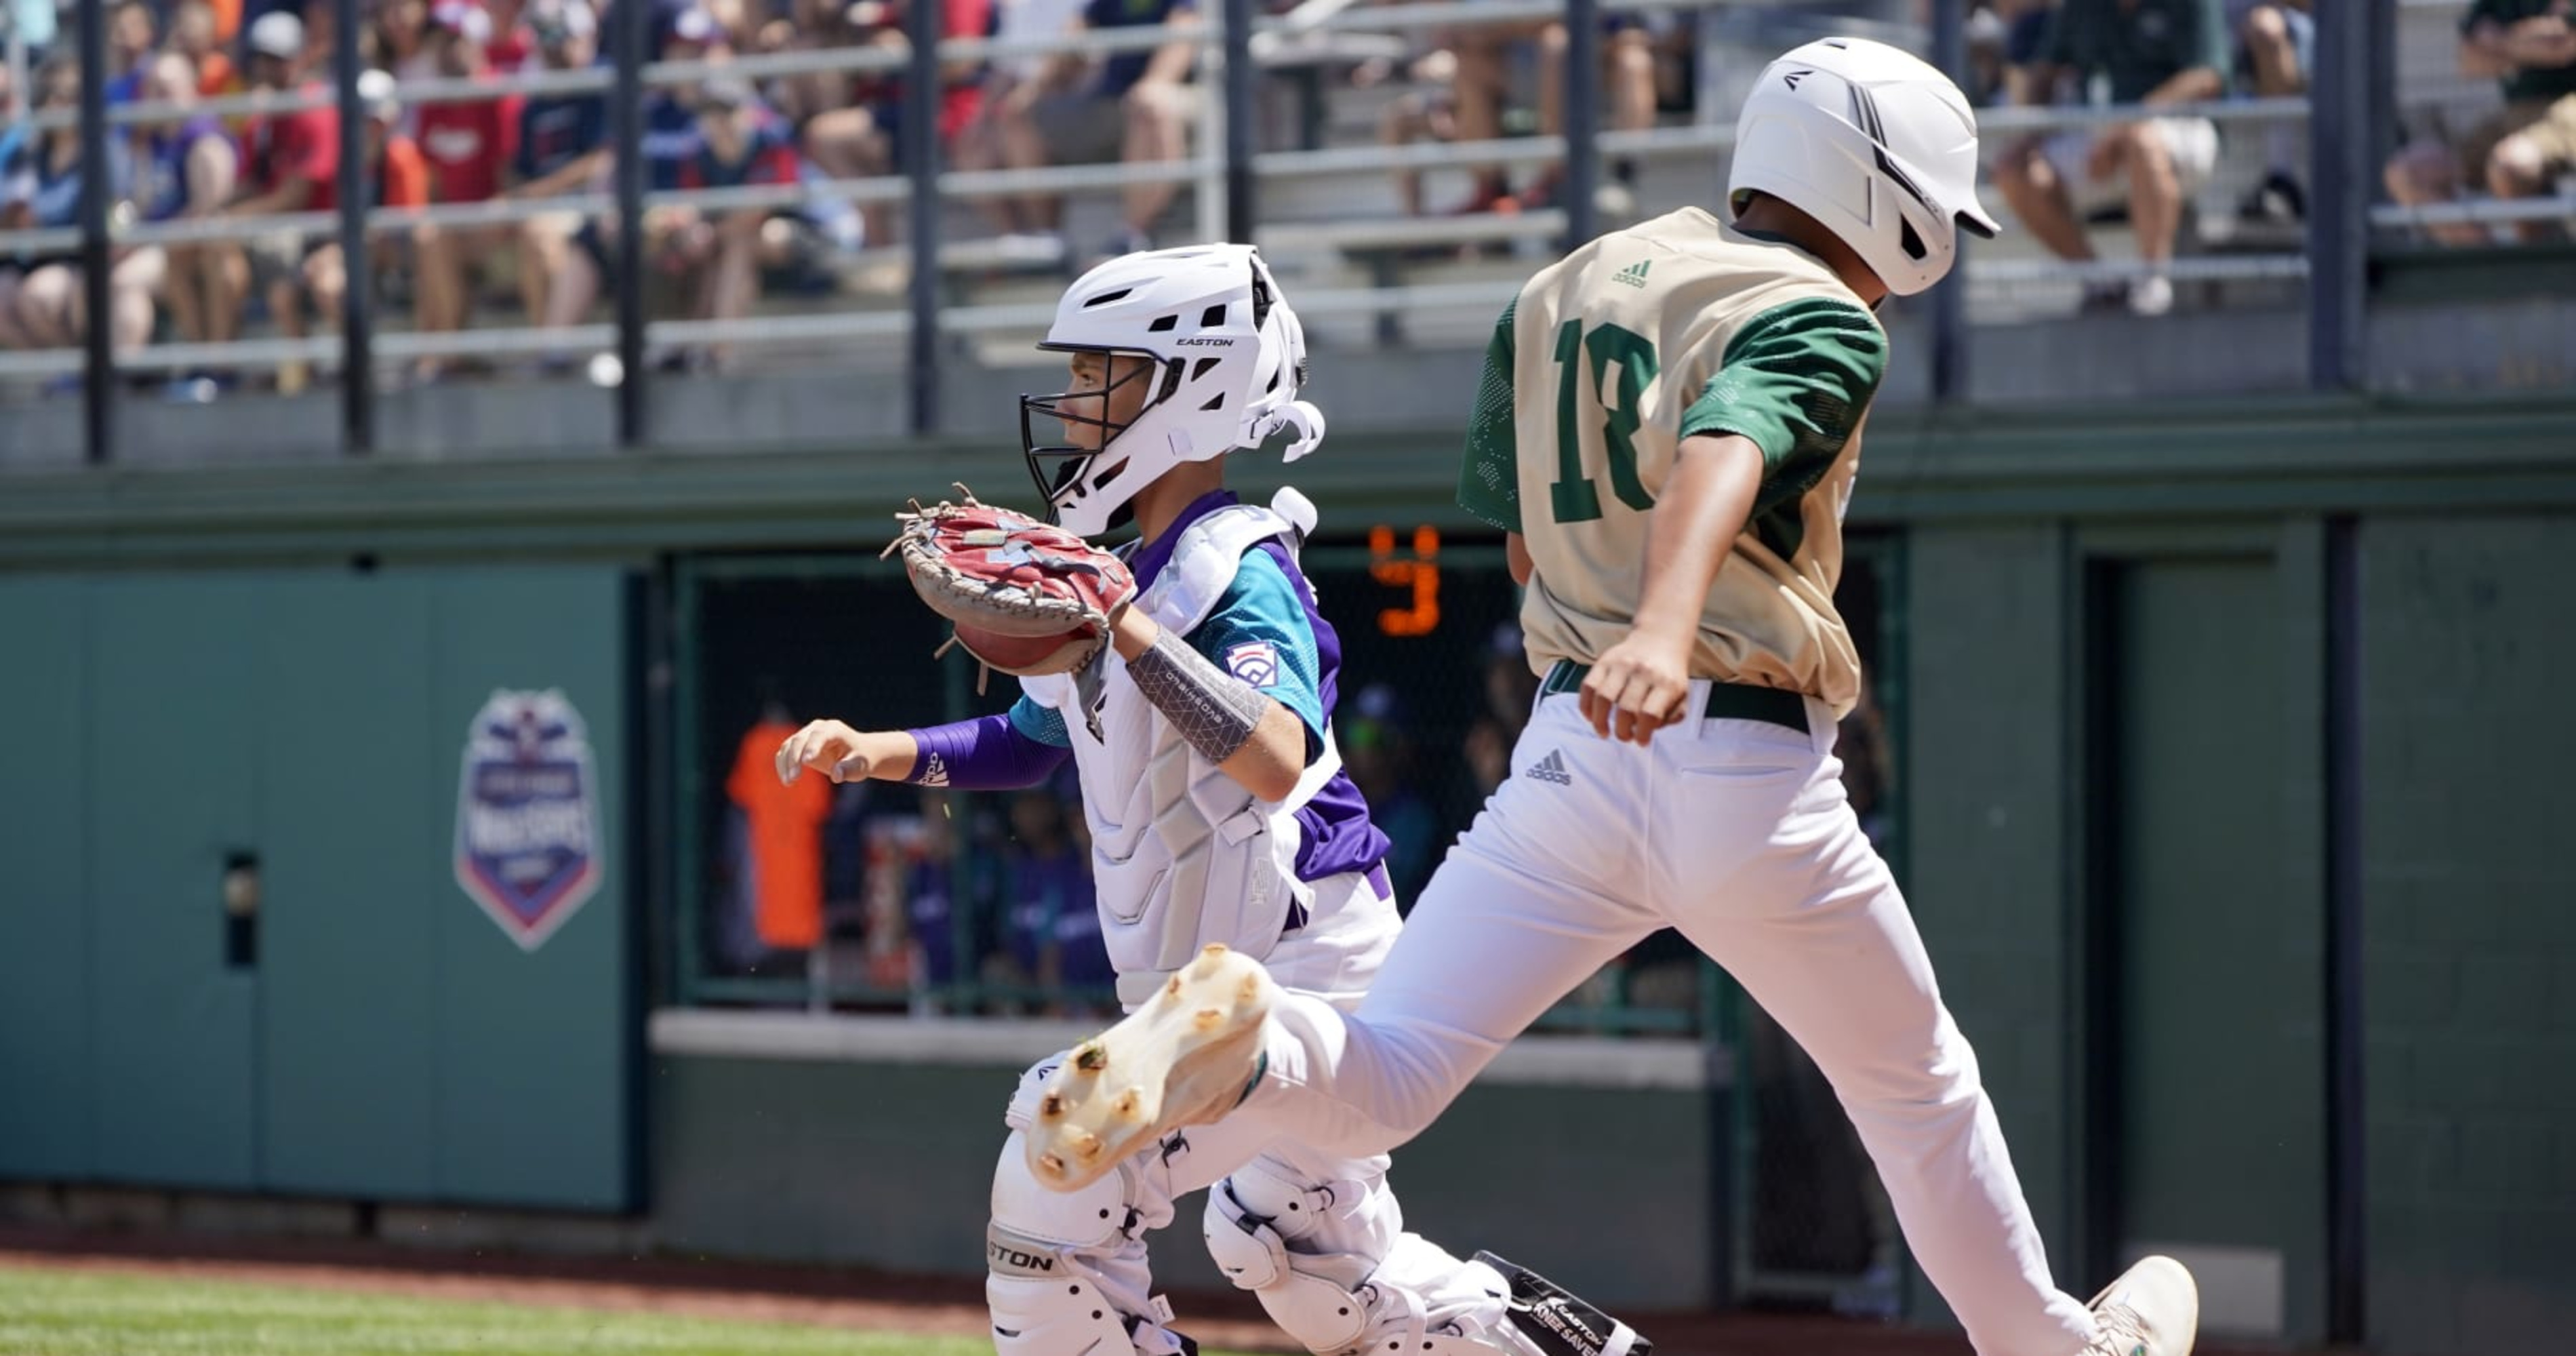 Little League World Series 2022 Thursday Scores, Bracket Results and